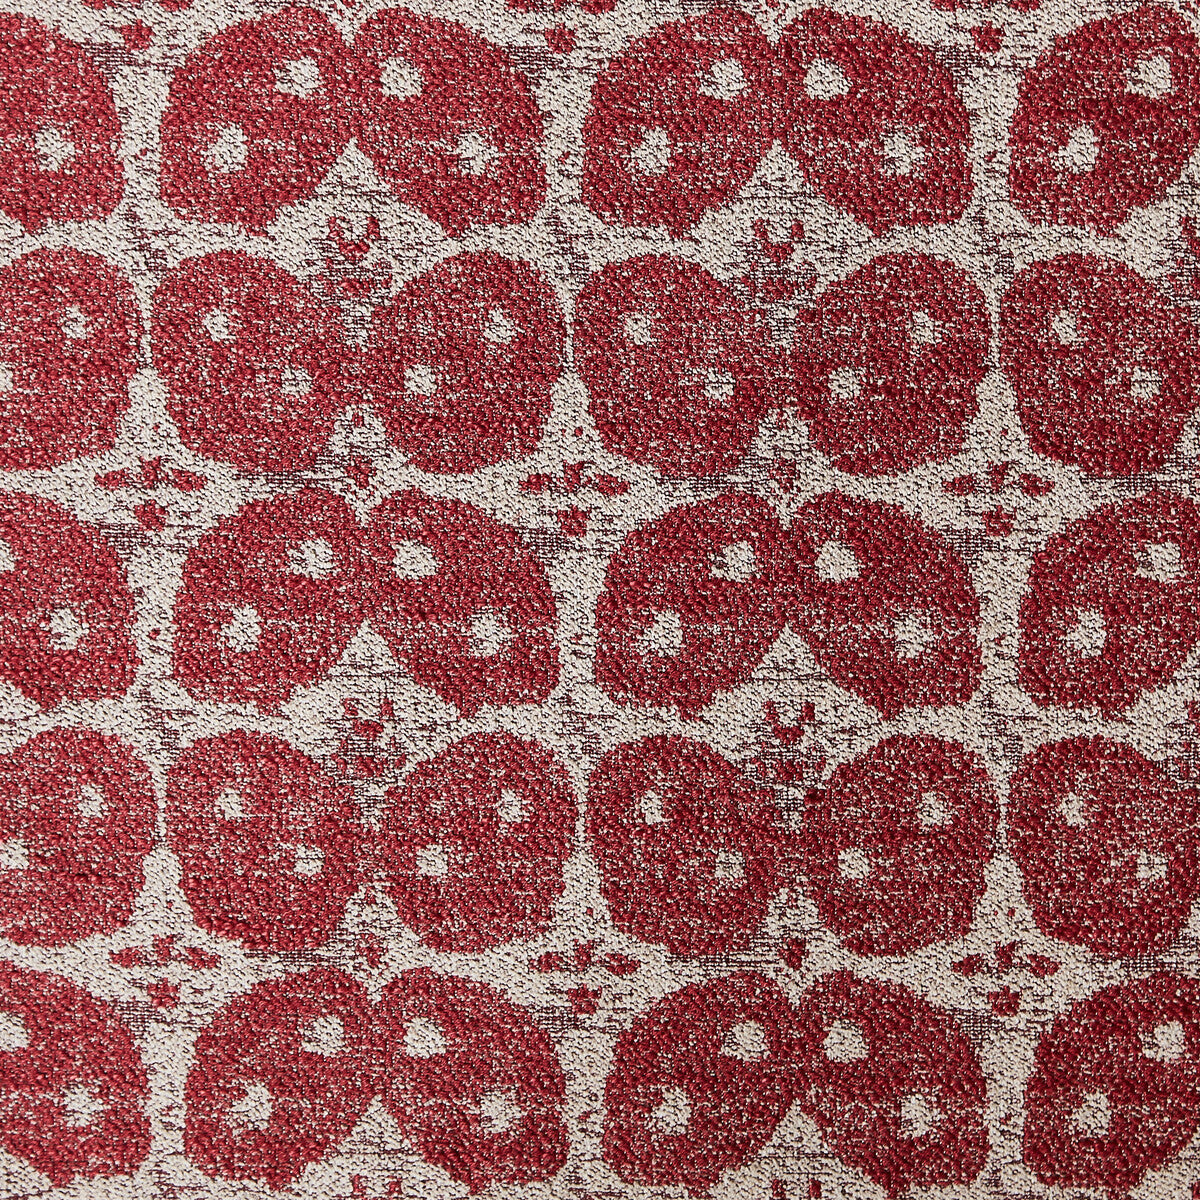 Panarea fabric in ruby color - pattern GWF-3201.19.0 - by Lee Jofa Modern in the Allegra Hicks Islands collection